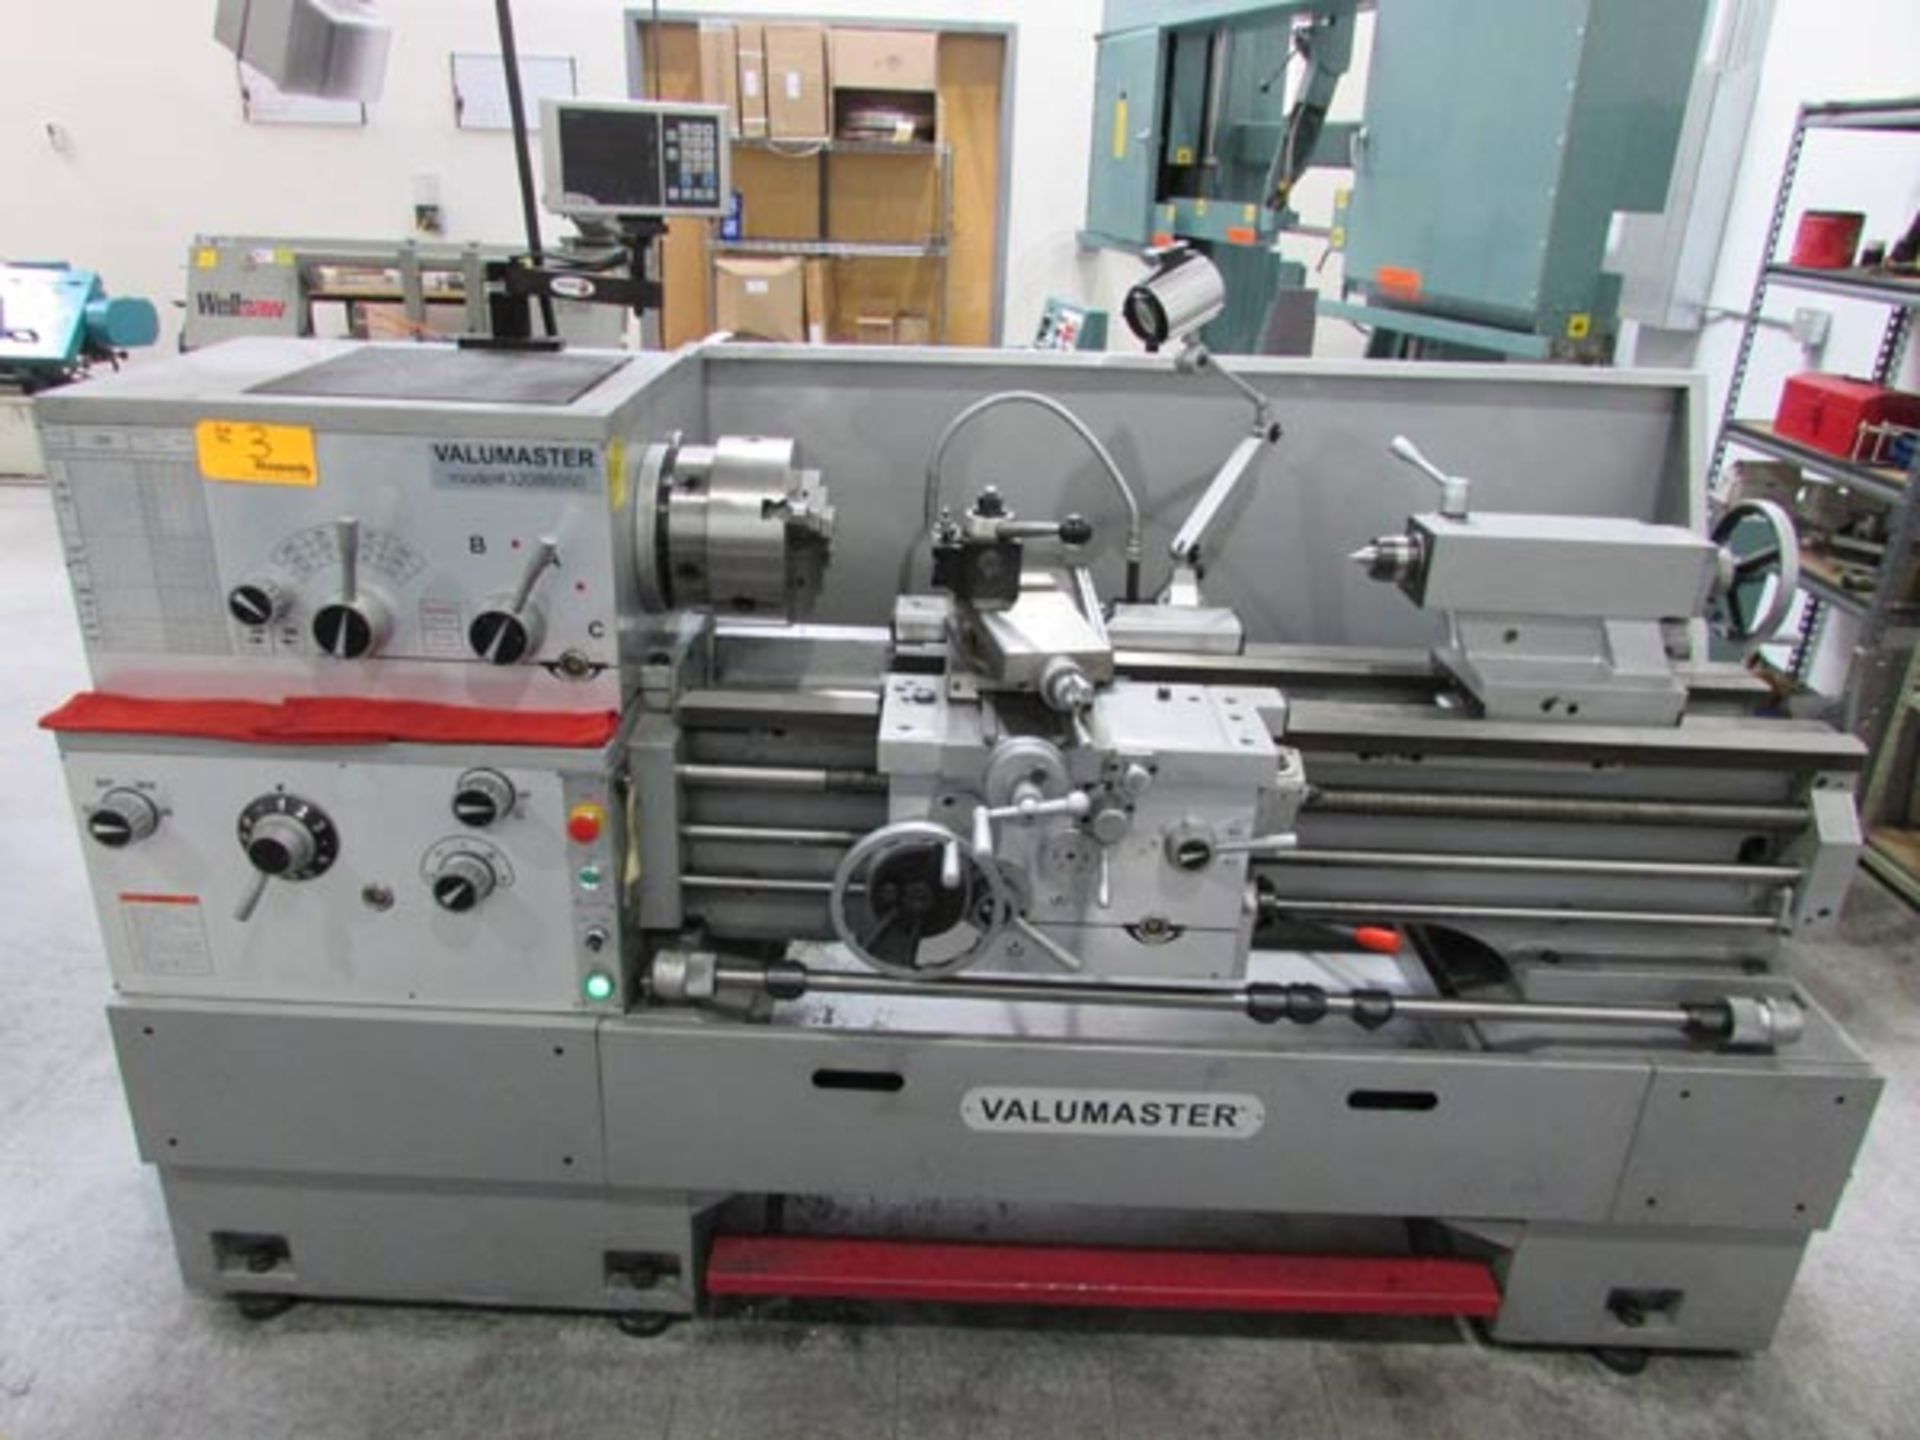 Valumaster Mdl: 32086050 Lathe 14'' Swing, 40'' Between Centers, 35'' Carriage Travel, 9'' Cross